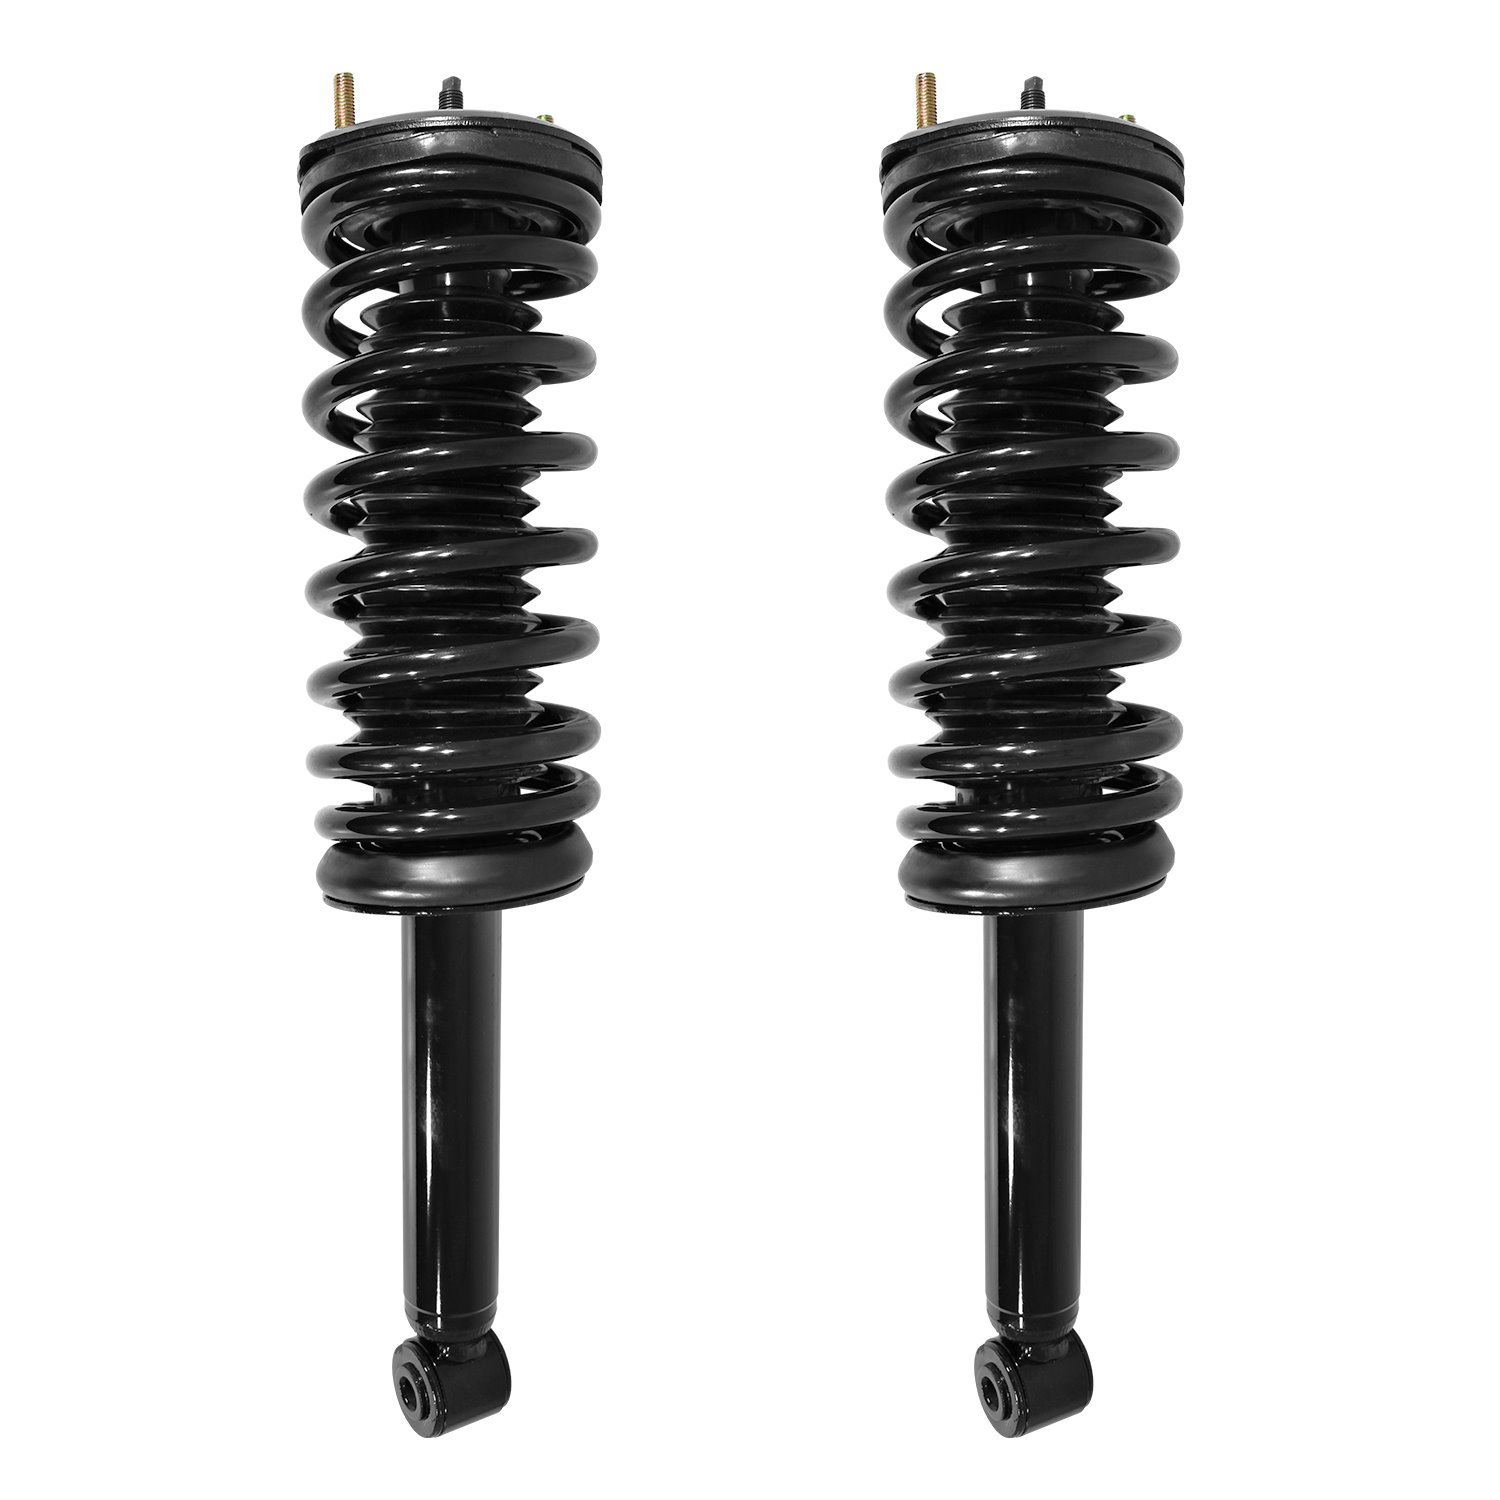 2-15270-001 Suspension Strut & Coil Spring Assembly Set Fits Select Nissan Maxima, Infiniti I30